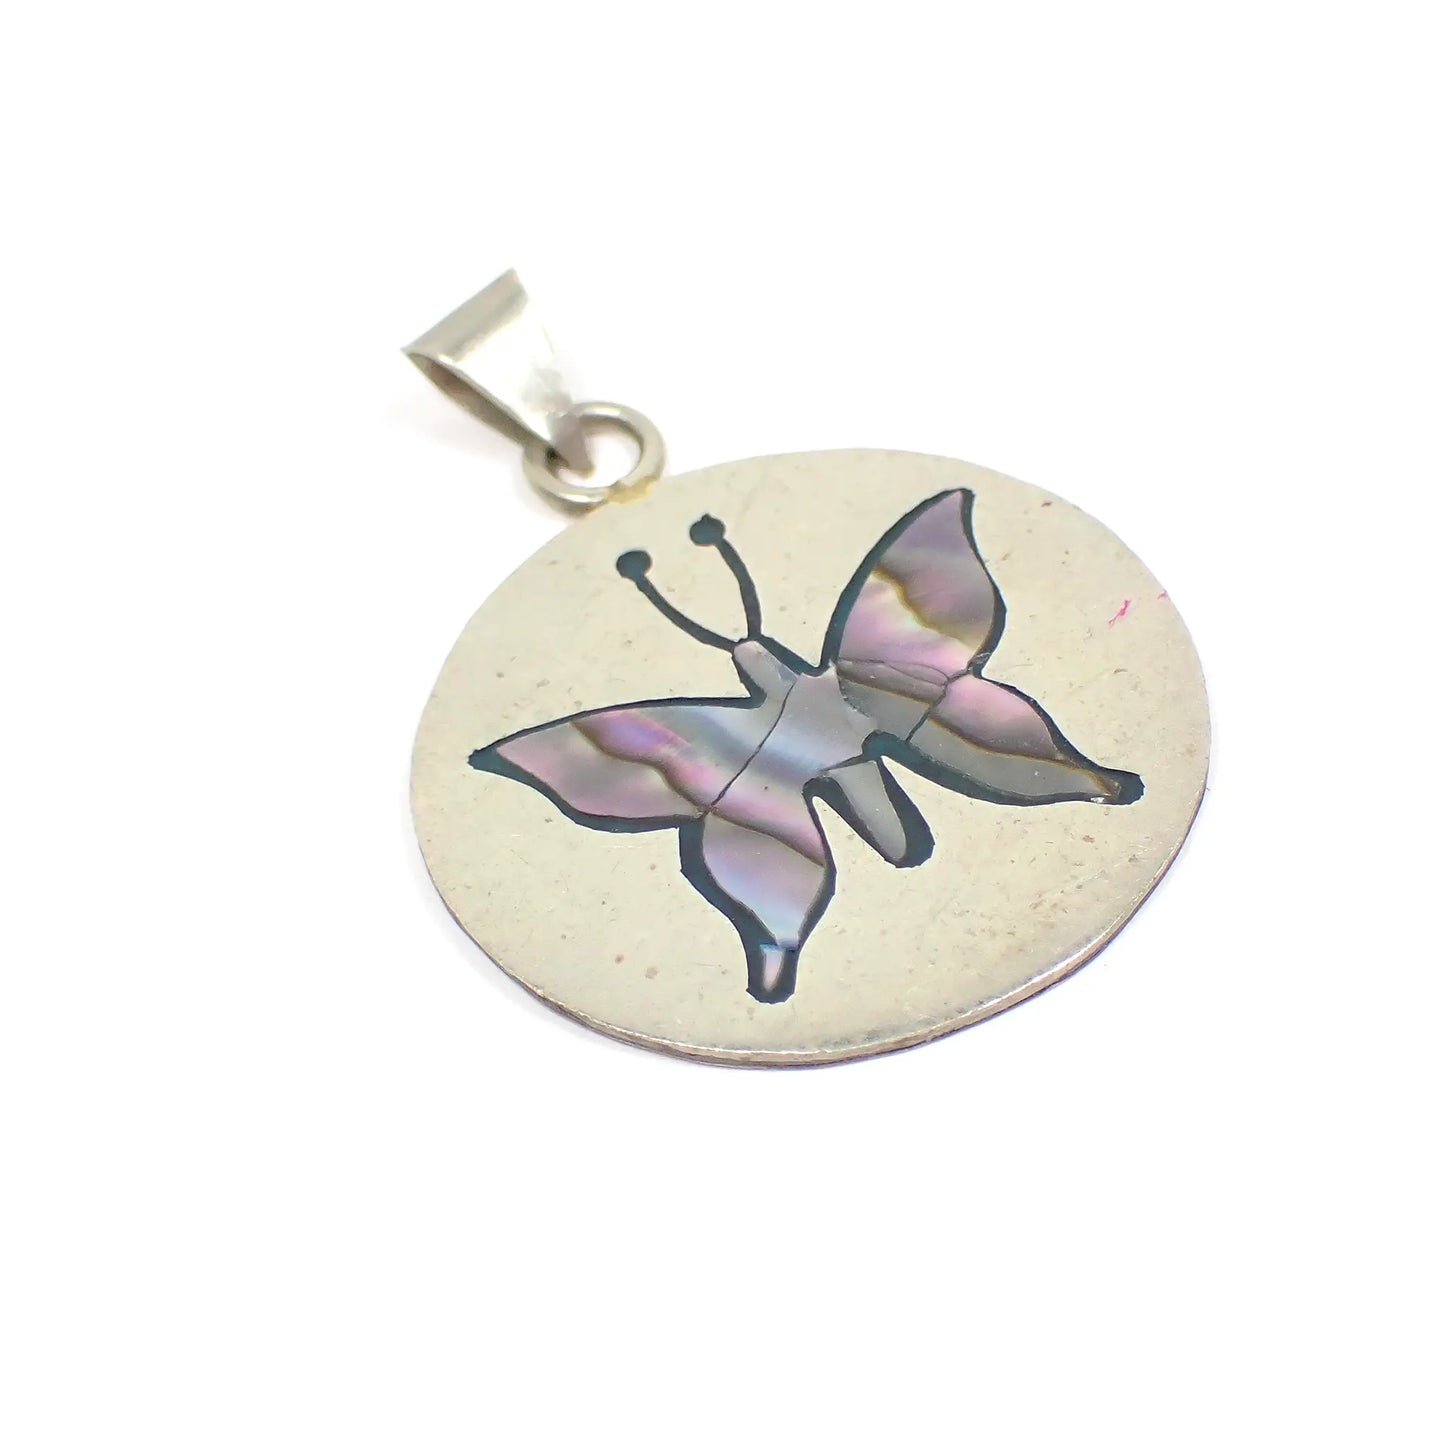 Alpaca Mexico Marked Vintage Round Pendant with Inlaid Abalone Shell Butterfly Design